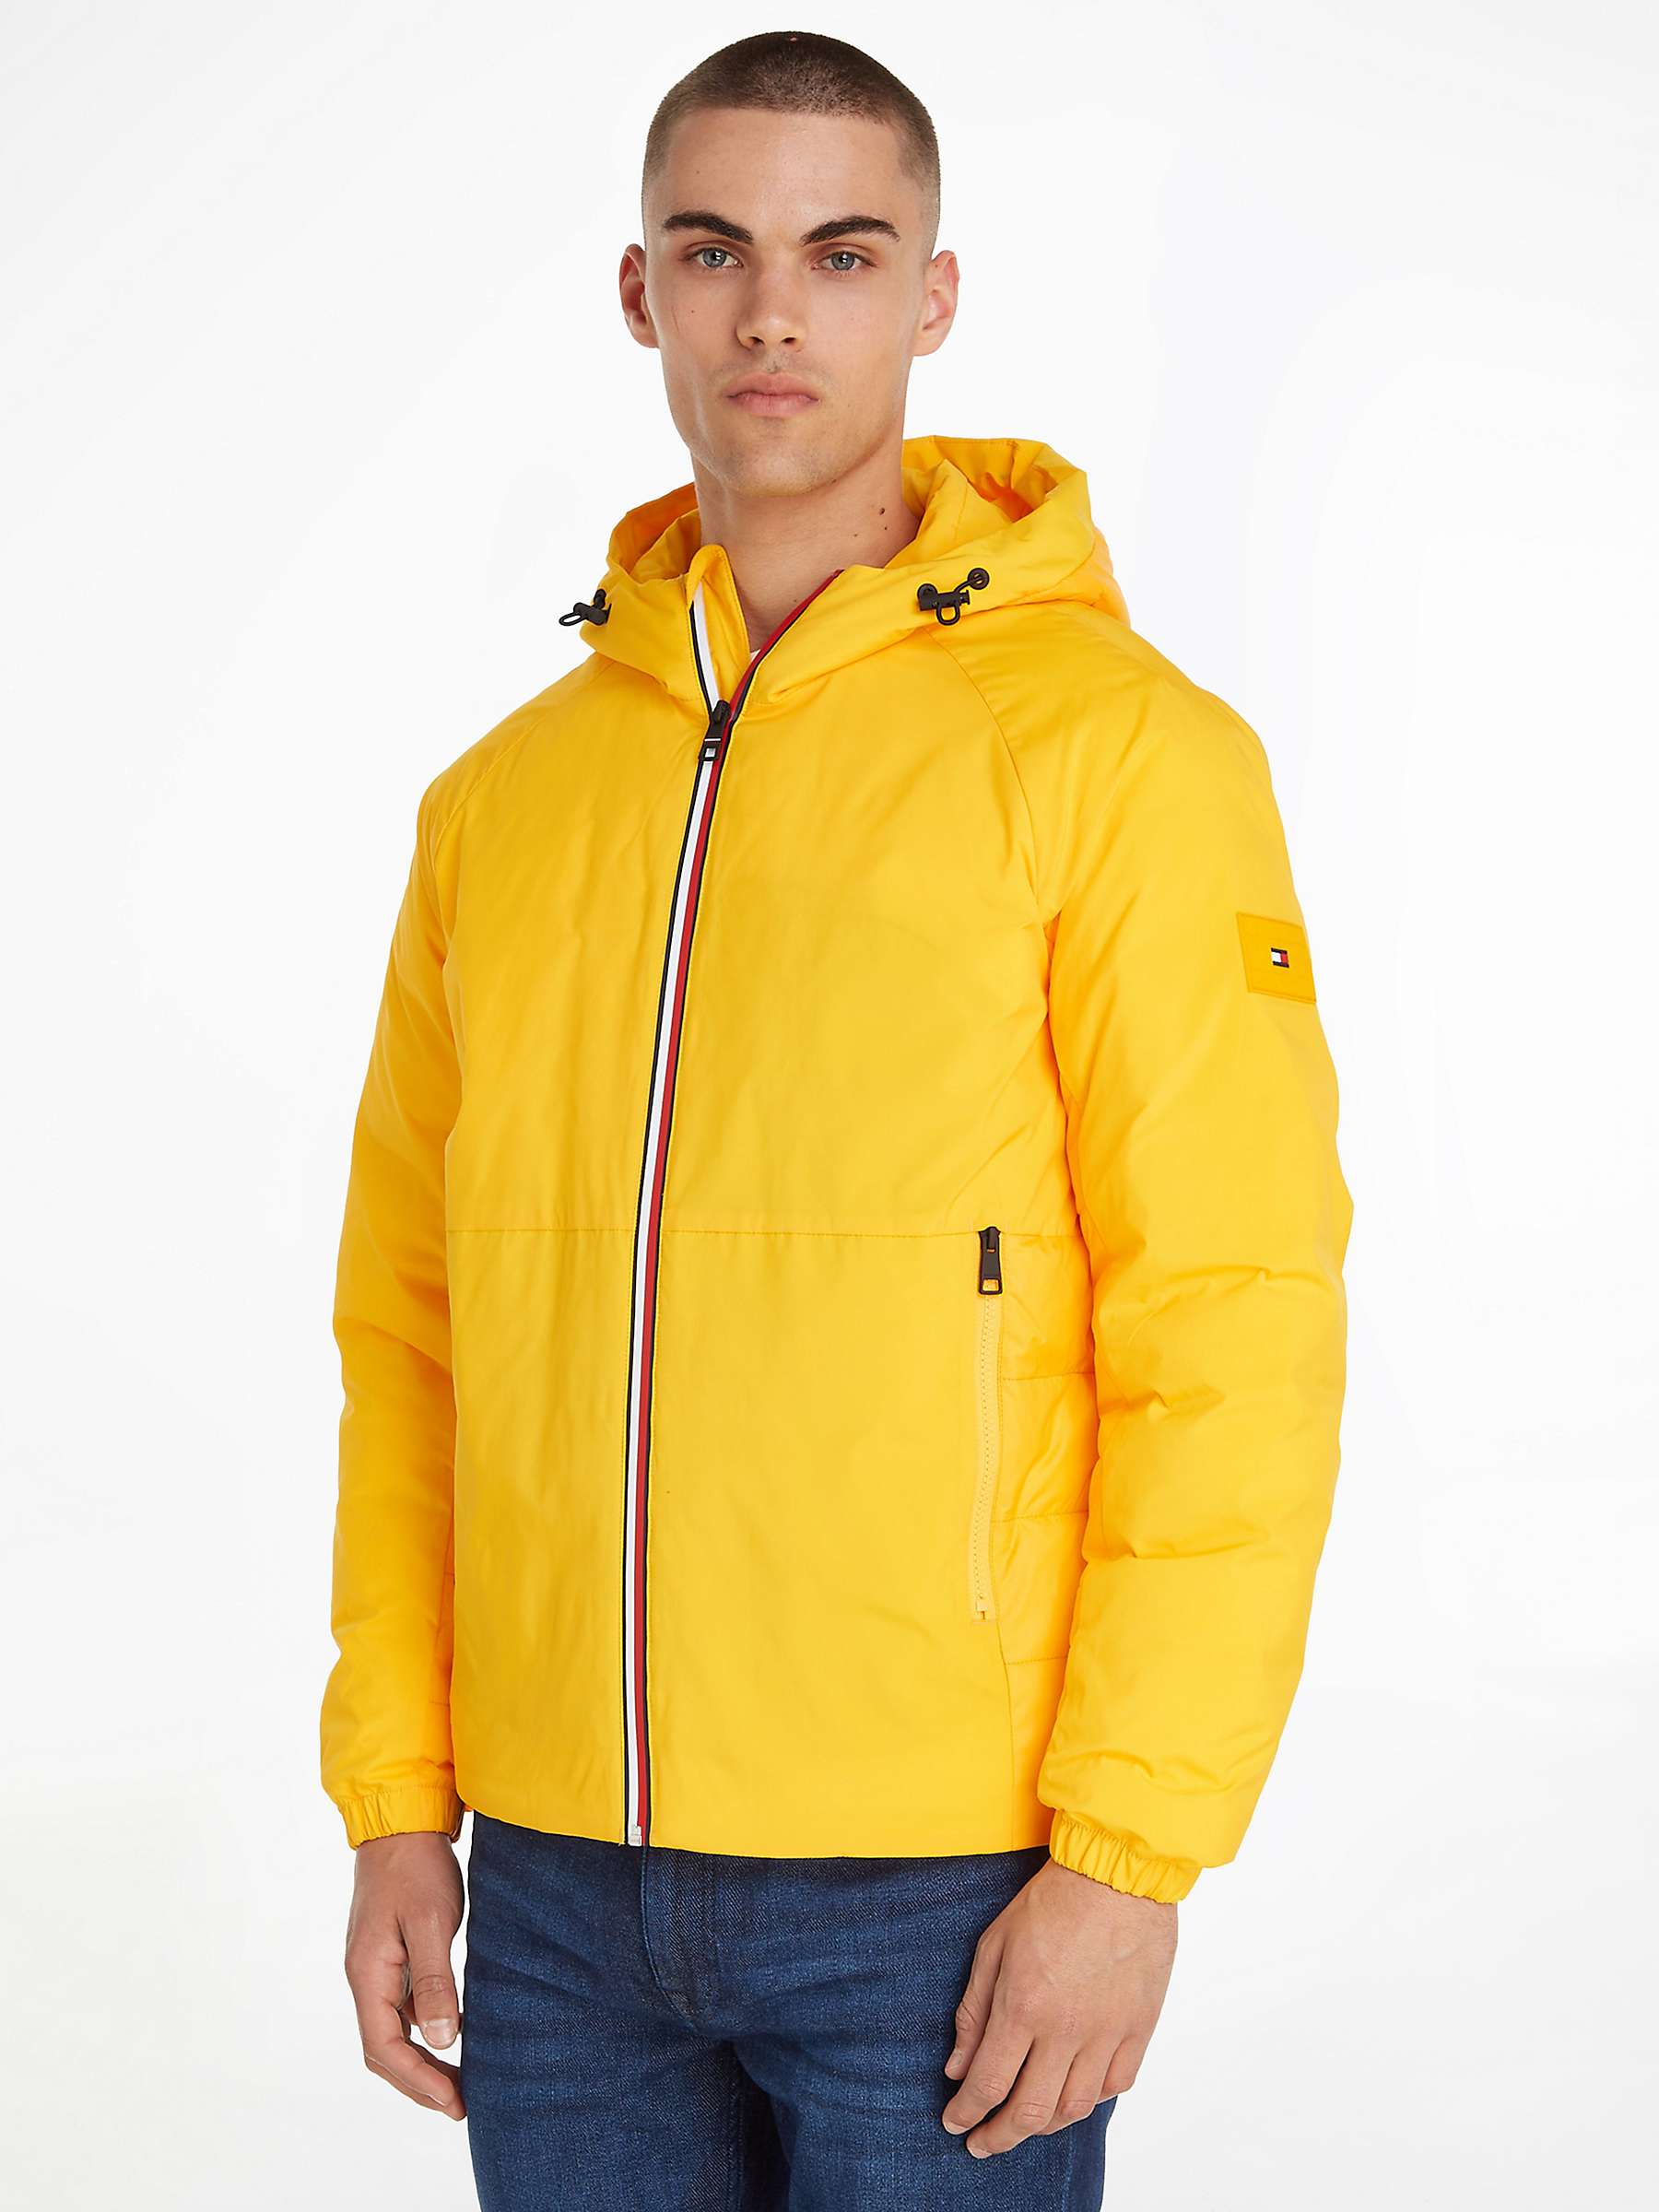 Tommy Hilfiger Mixed Media Hooded Jacket, Solstice at John Lewis & Partners